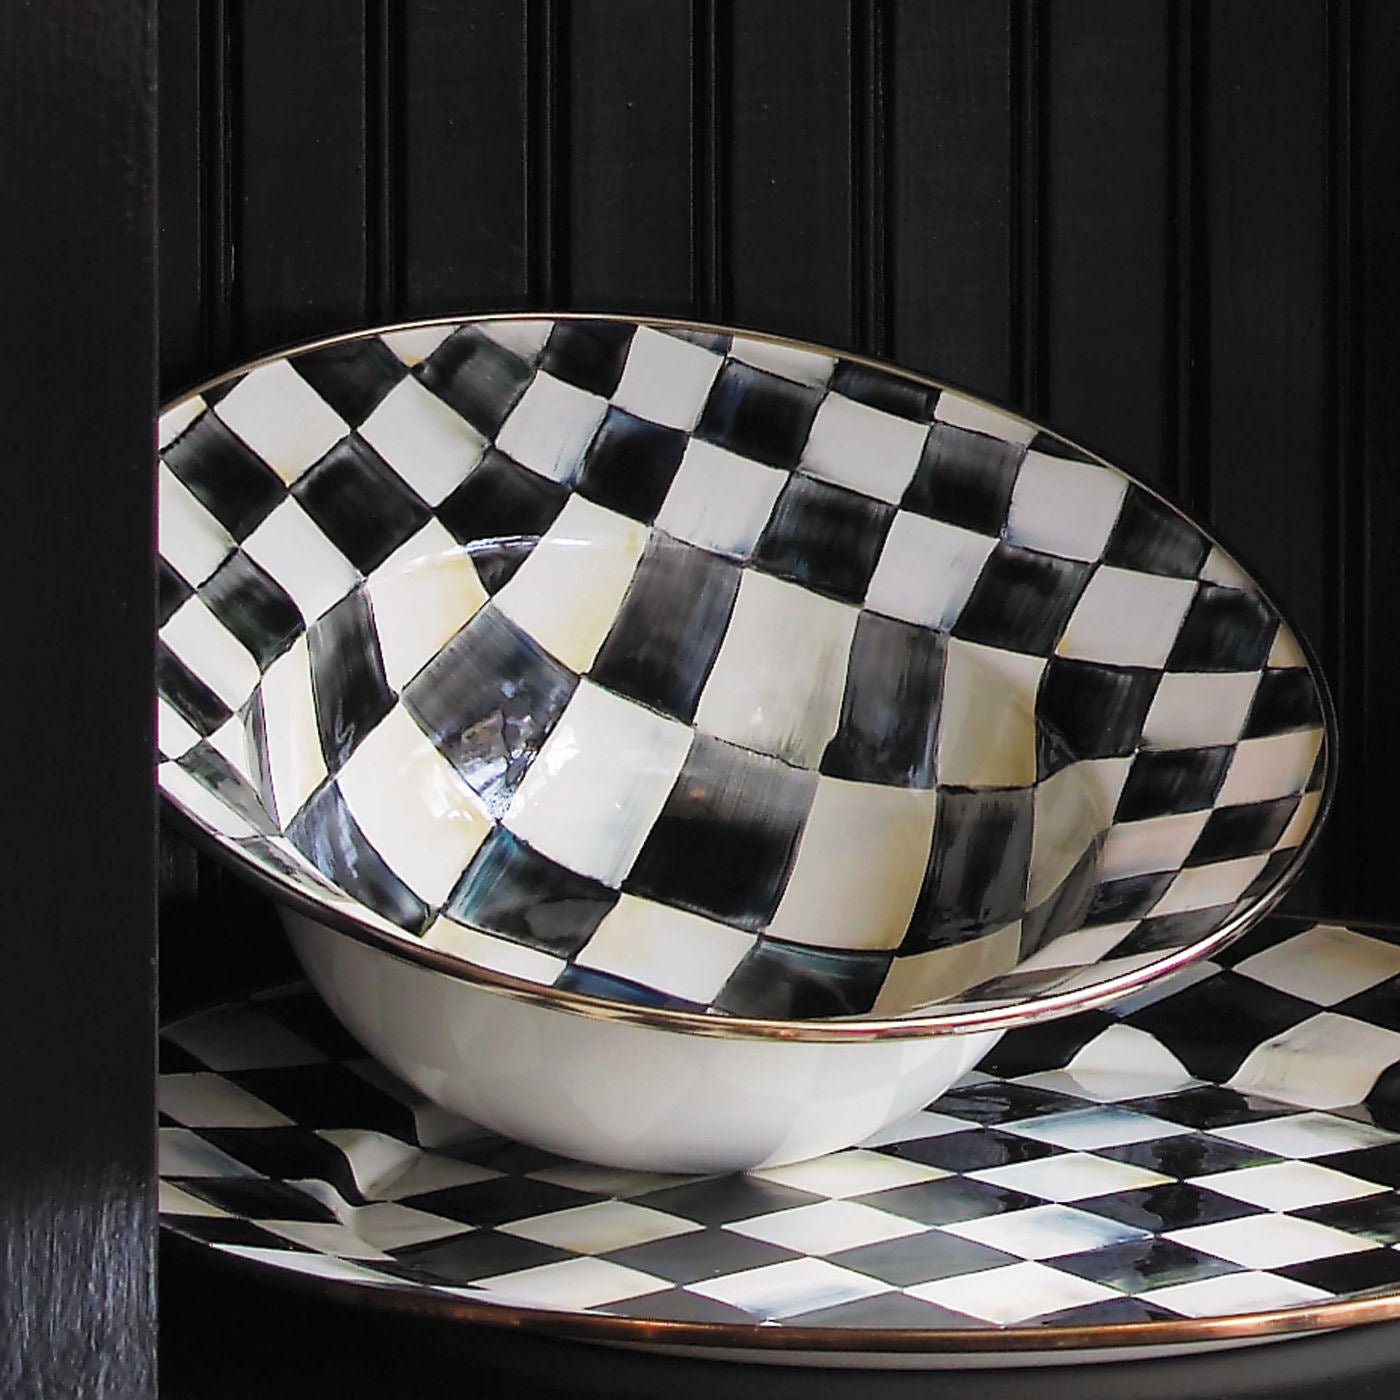 Courtly Check Serving Bowl - |VESIMI Design| Luxury Bathrooms and Home Decor